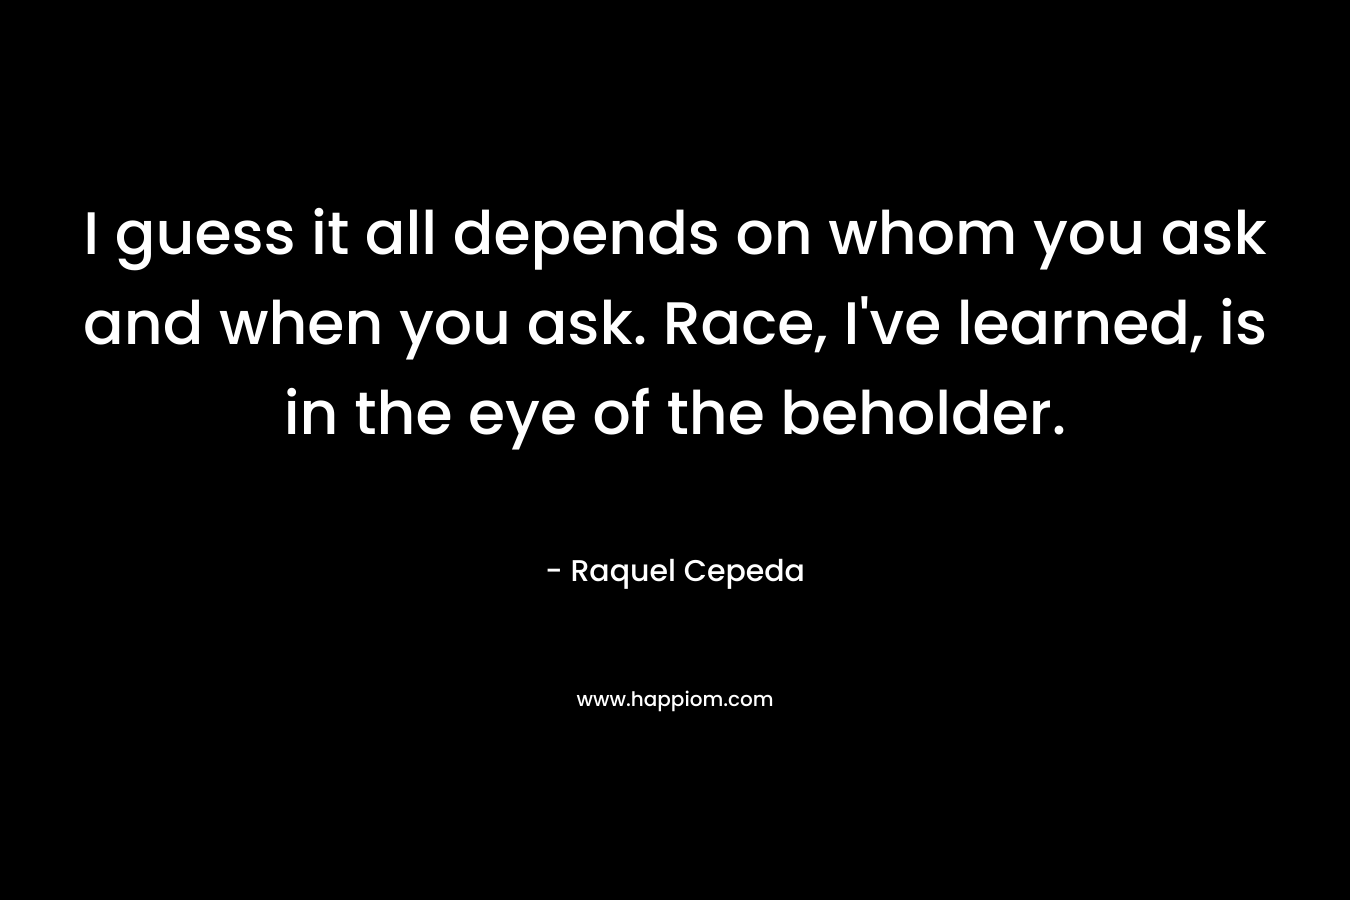 I guess it all depends on whom you ask and when you ask. Race, I’ve learned, is in the eye of the beholder. – Raquel Cepeda